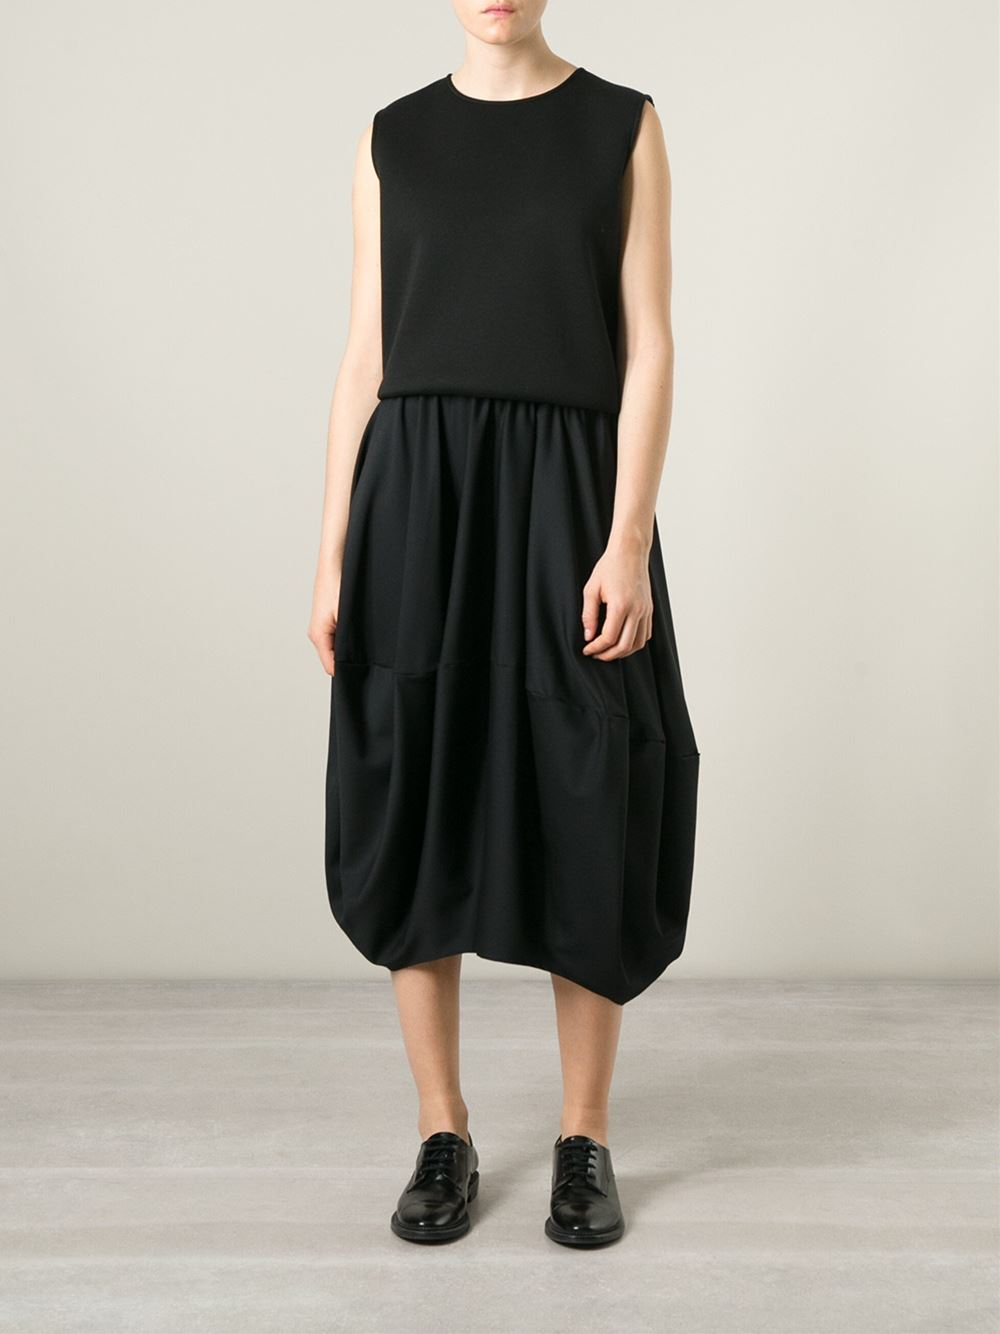 Lyst - Nomad Cocoon Shape Skirt in Black